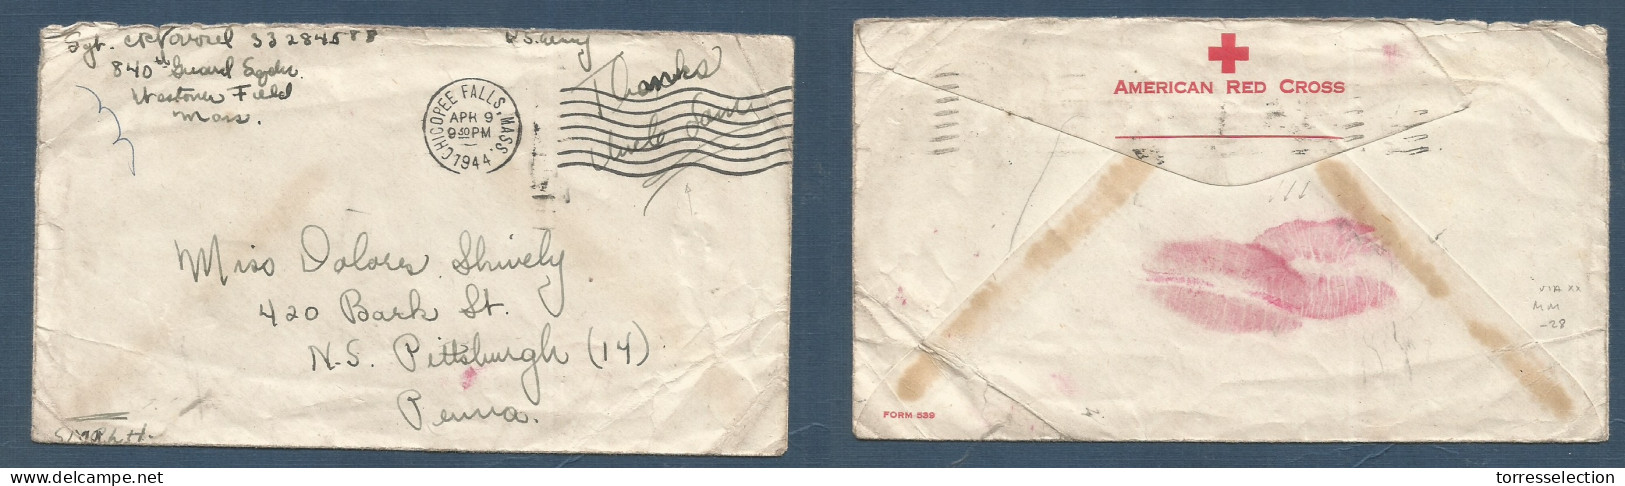 MILITARY MAIL. 1944 (9 Apr) WWI. American Red Cross. Chicago Falls - Pittsburg, PA. FM Envelope Mns "Thanks Undesam" XSA - Posta Militare (PM)